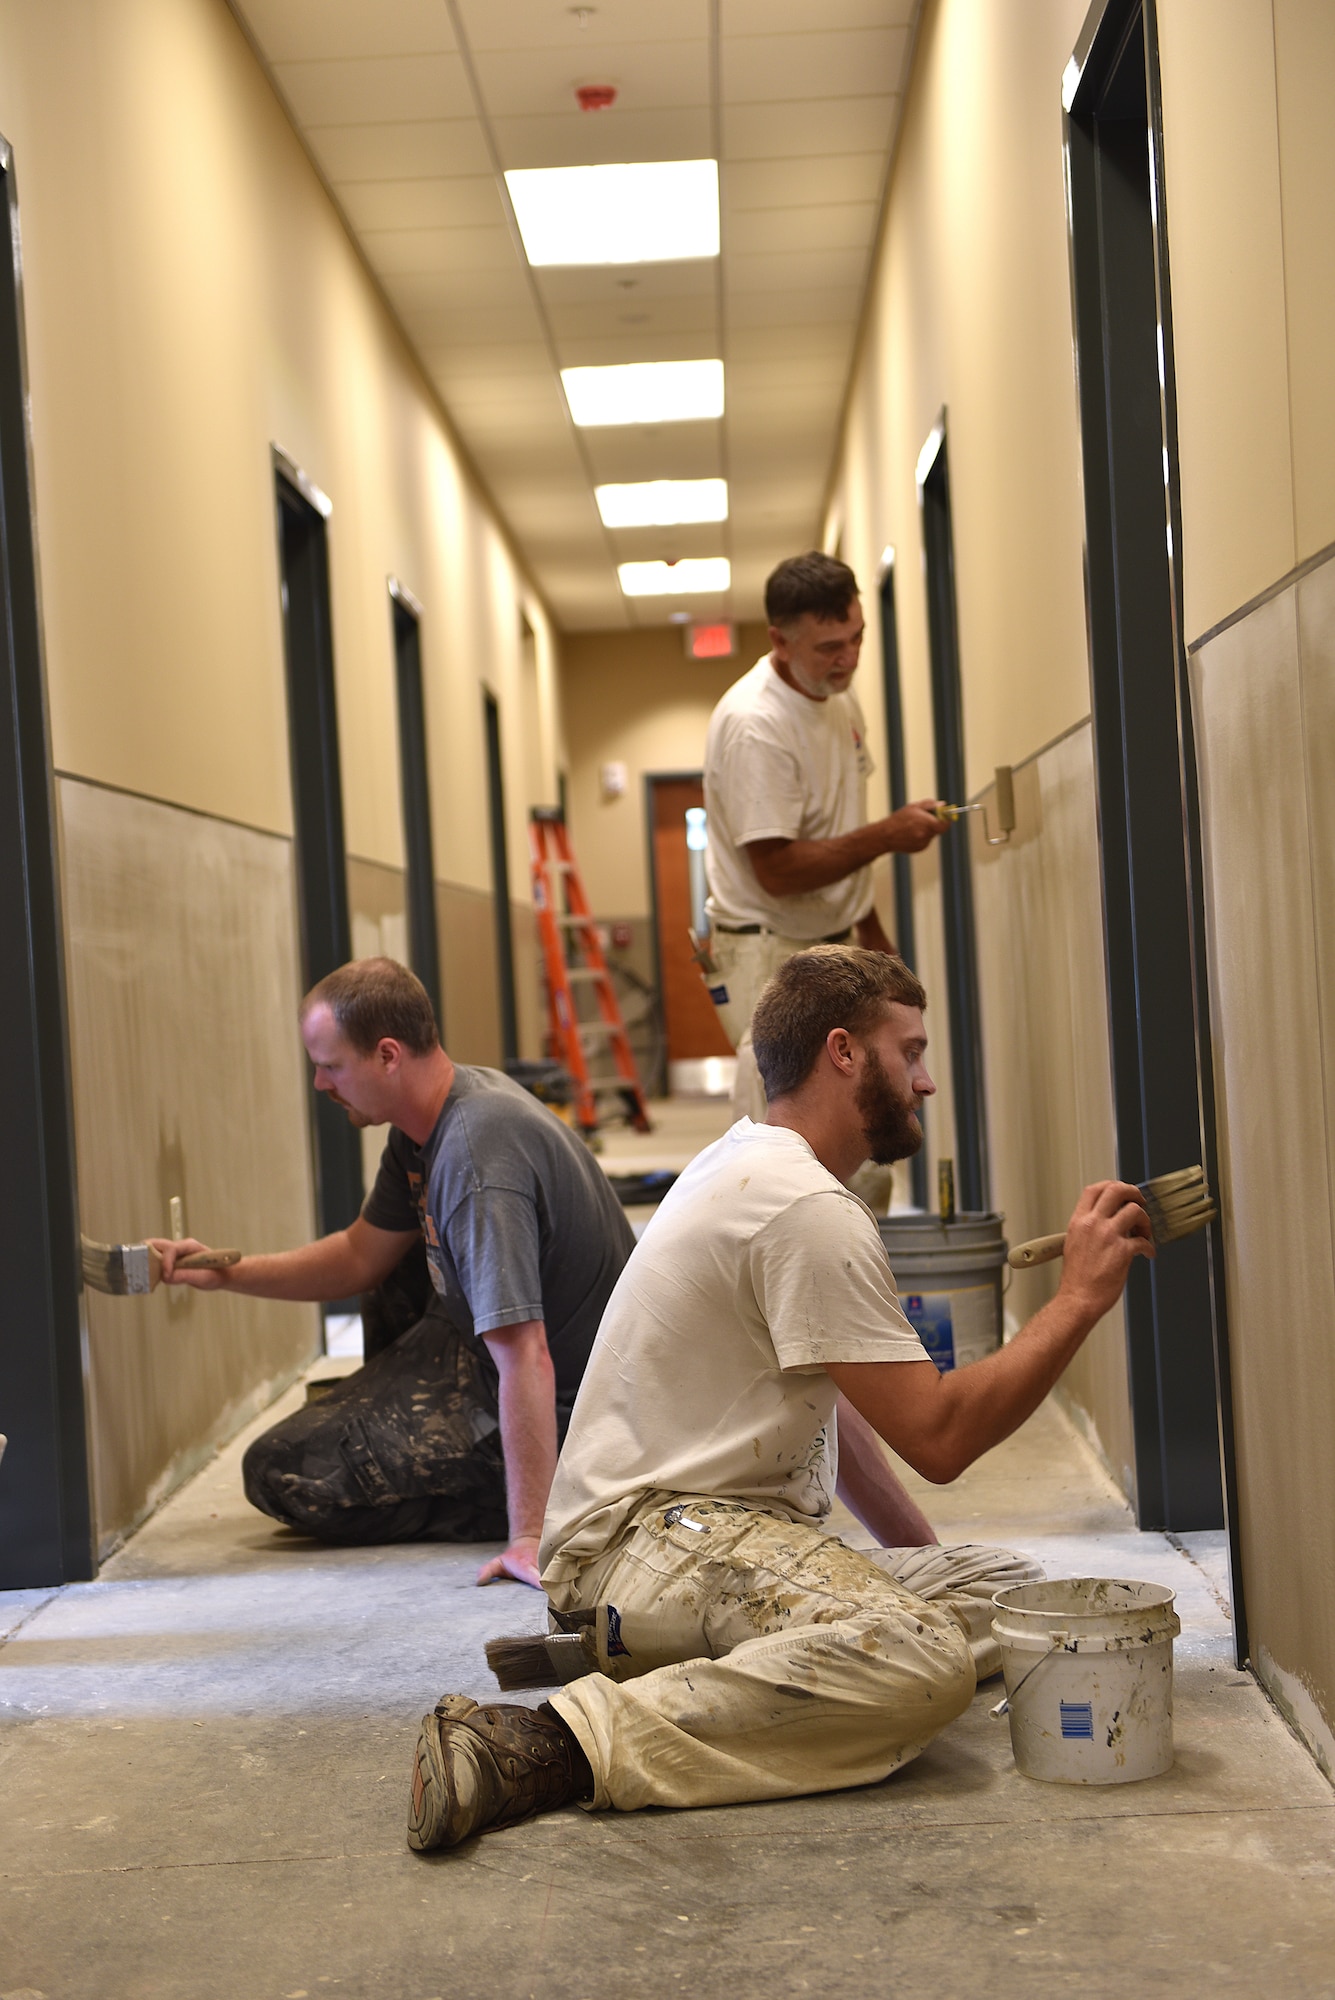 A paint crew makes progress here August 25, 2016, in a hallway on the first floor of the dormitory building under construction at the I.G. Brown Training and Education Center on McGhee Tyson Air National Guard Base in Louisville, Tenn. The painters were busy throughout the summer. The lower wall color is named Sycamore Tan and the upper color is Bittersweet Stem. (U.S. Air National Guard photo by Master Sgt. Mike R. Smith)